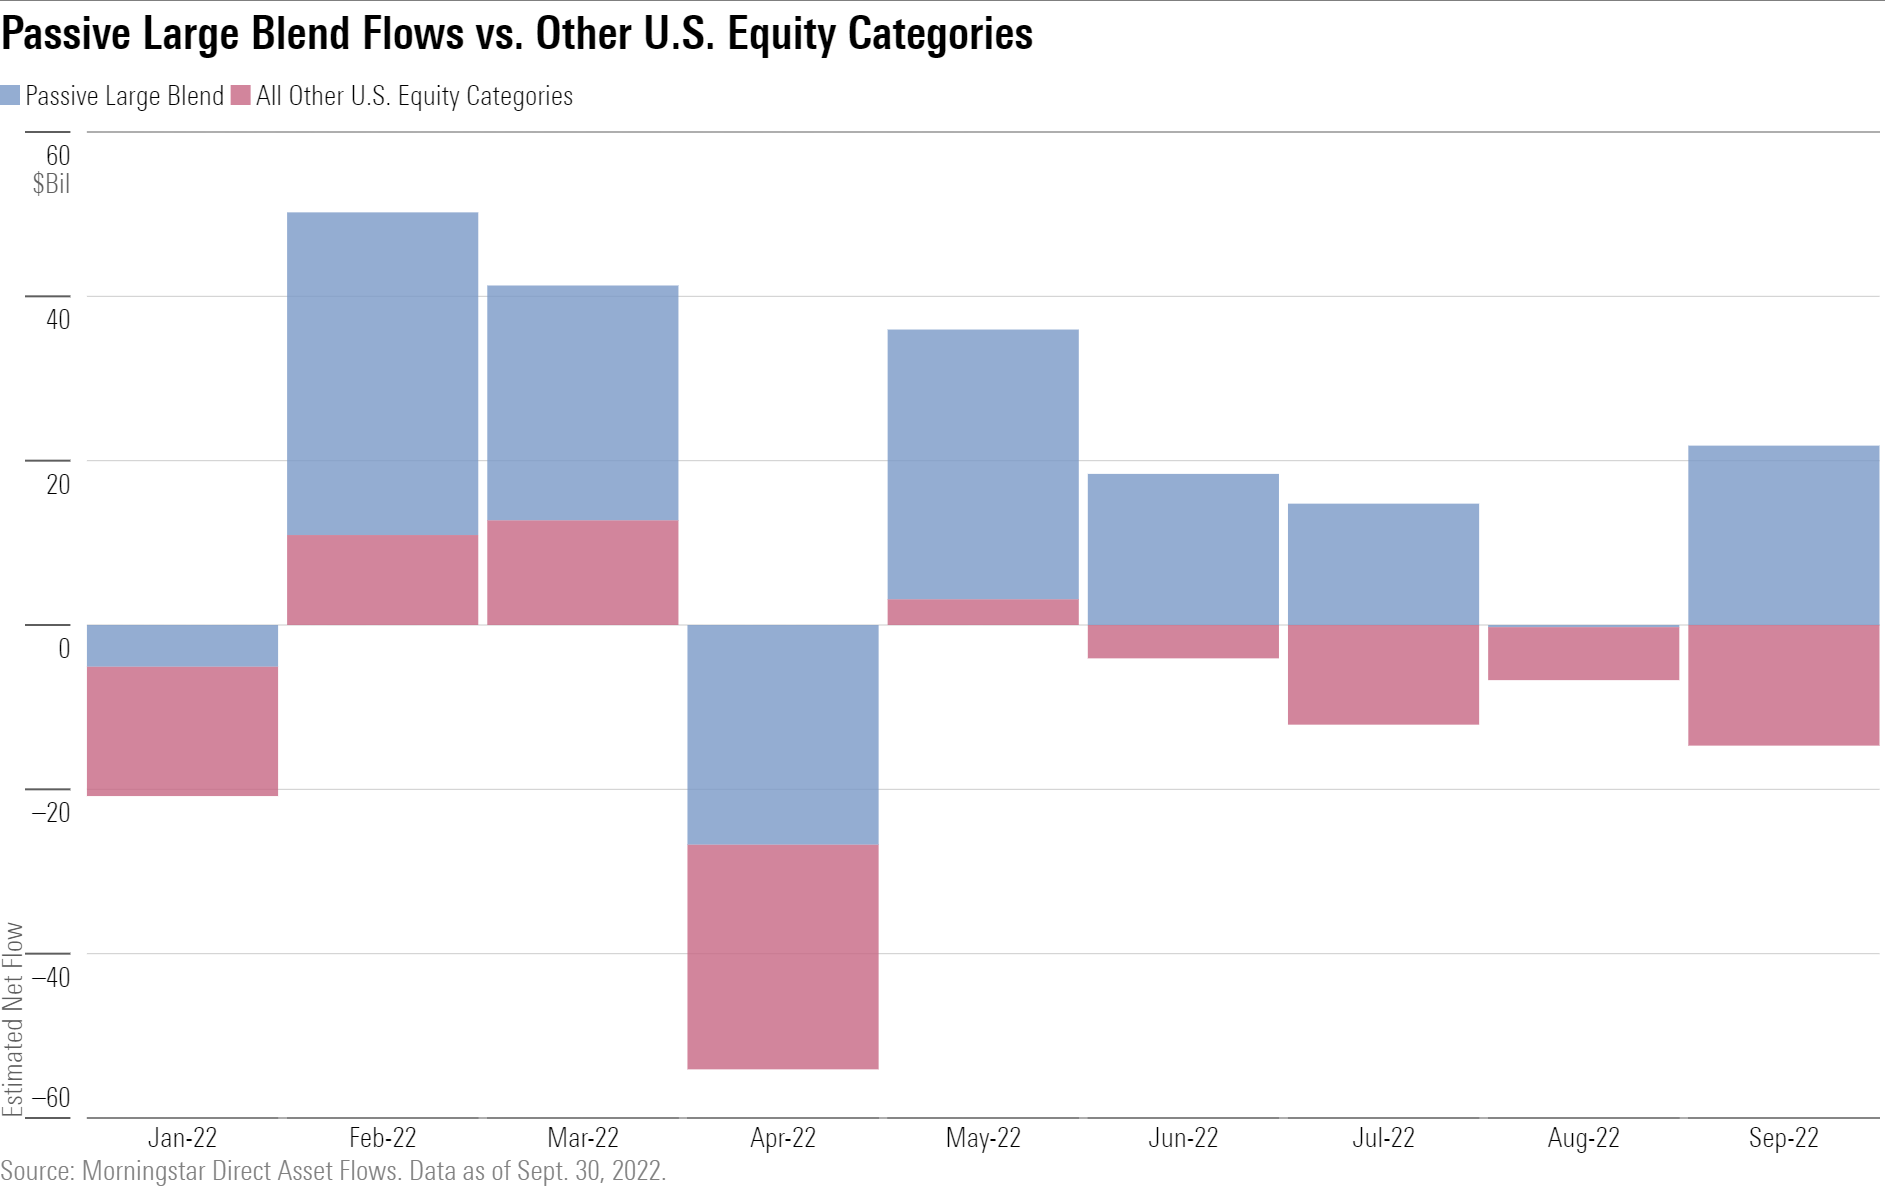 Investors have poured $124 billion into these offerings for the year to date through September, including $36 billion in the third quarter. All other categories in the group (plus active large-blend funds) saw combined outflows of $54 billion and $33 billion over those respective periods.